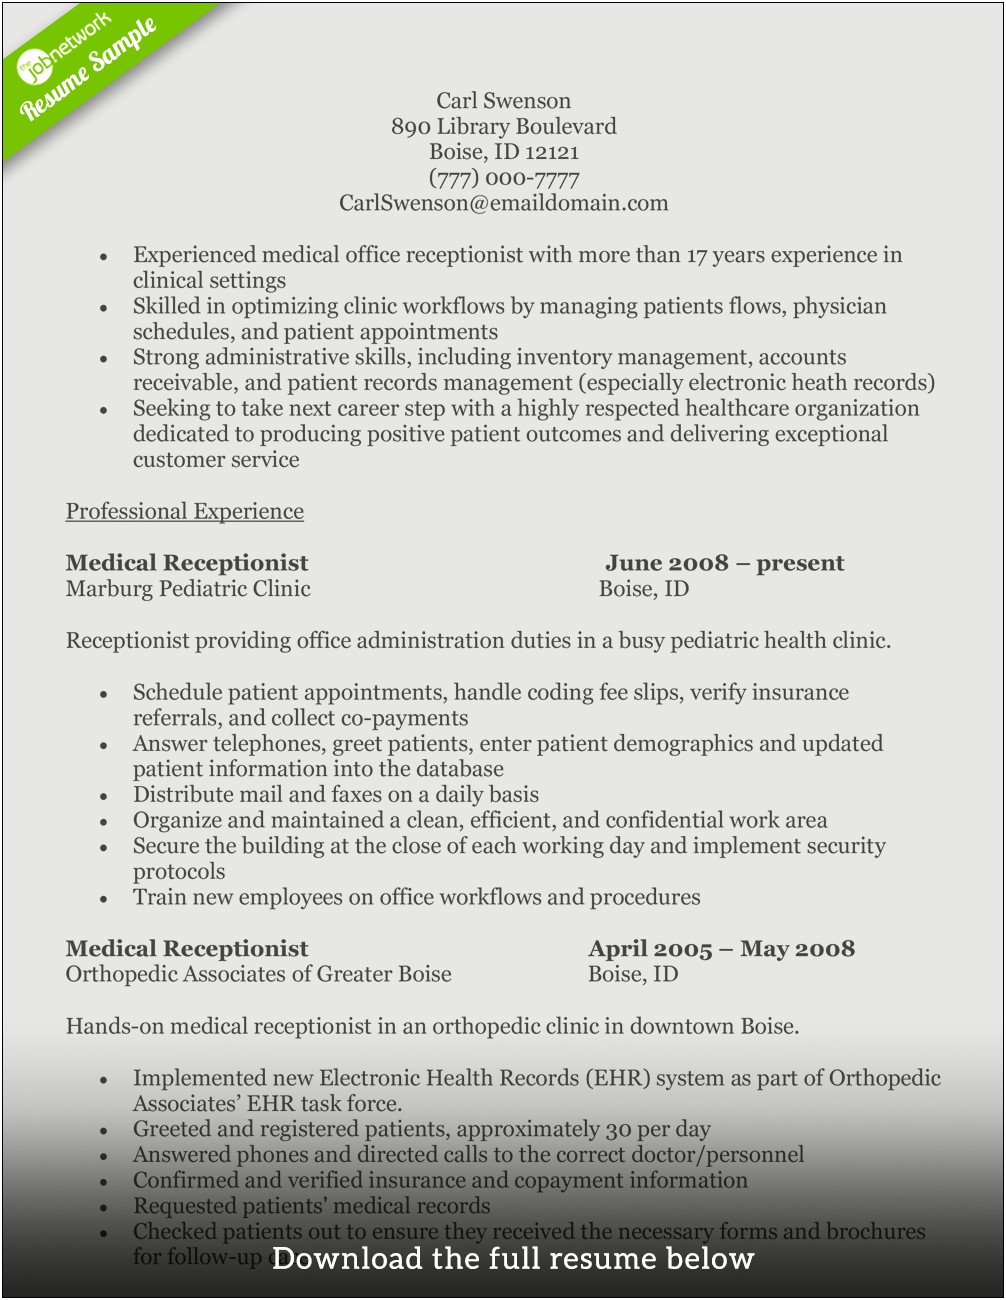 Post Falls Idaho Resume Cover Letter Help